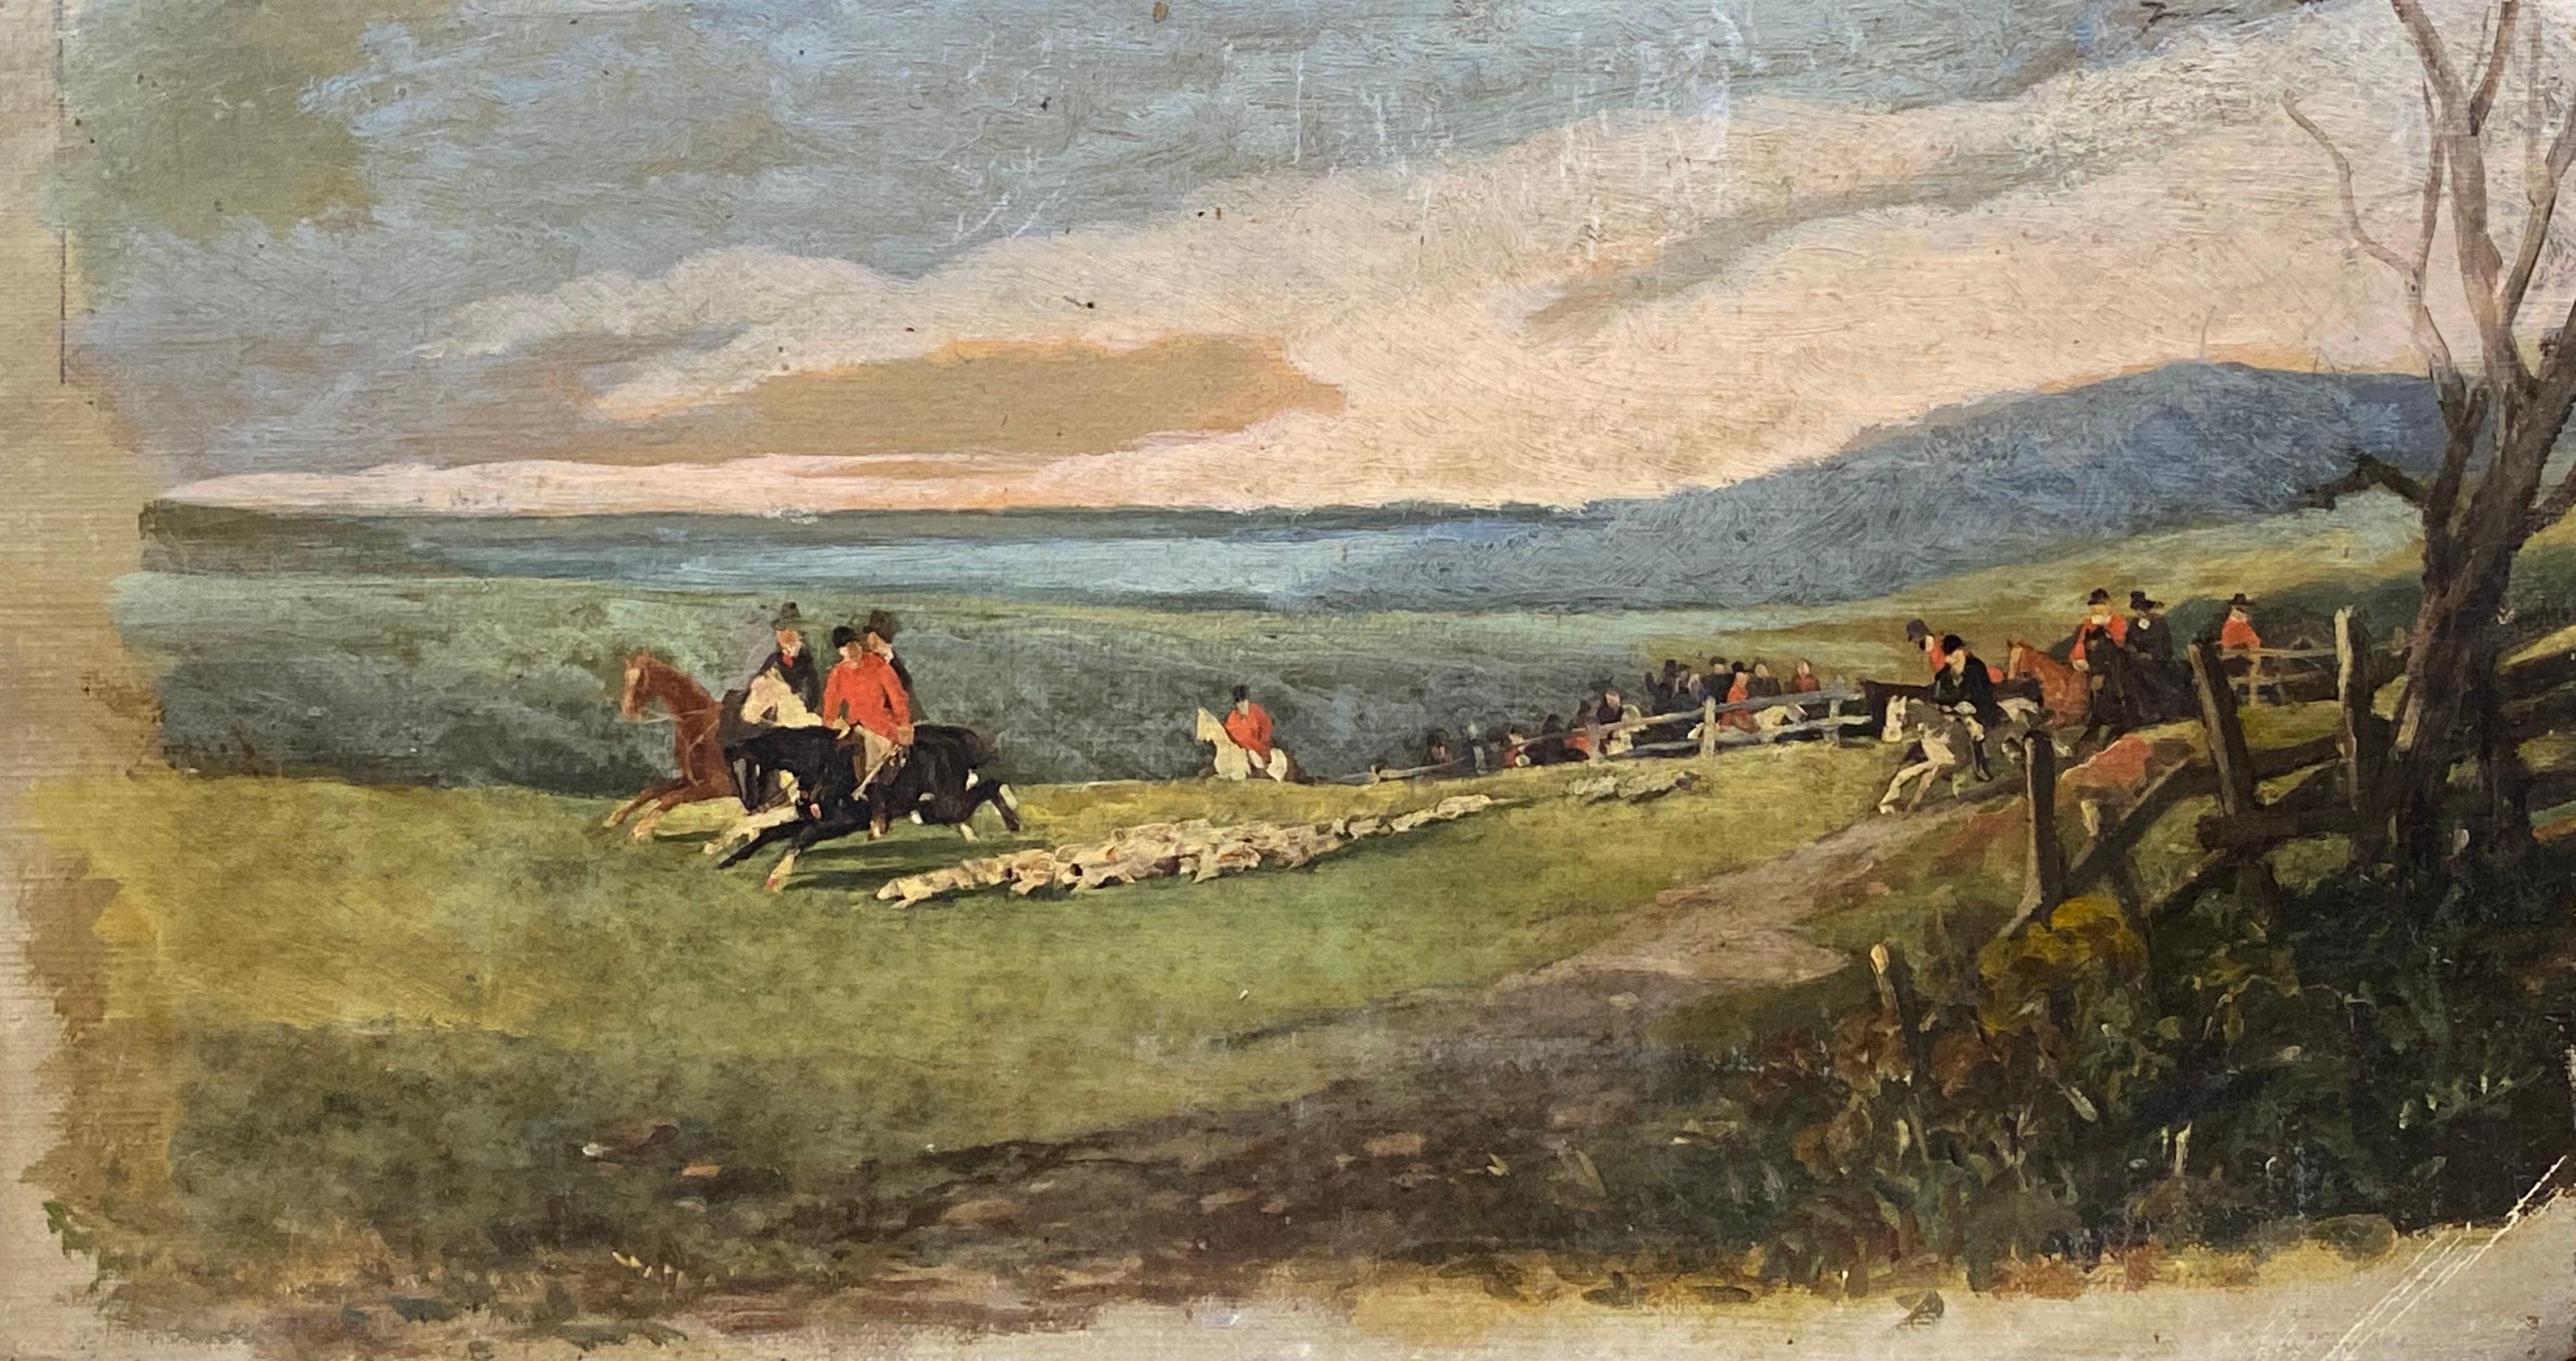 Artist/ School: English School, late 19th century

Title: Hunting Scene, horses and hounds

Medium: oil painting on thin canvas, unframed

canvas: 7.5 x 13.5 inches

Provenance: private collection, England

Condition: The painting is in overall good